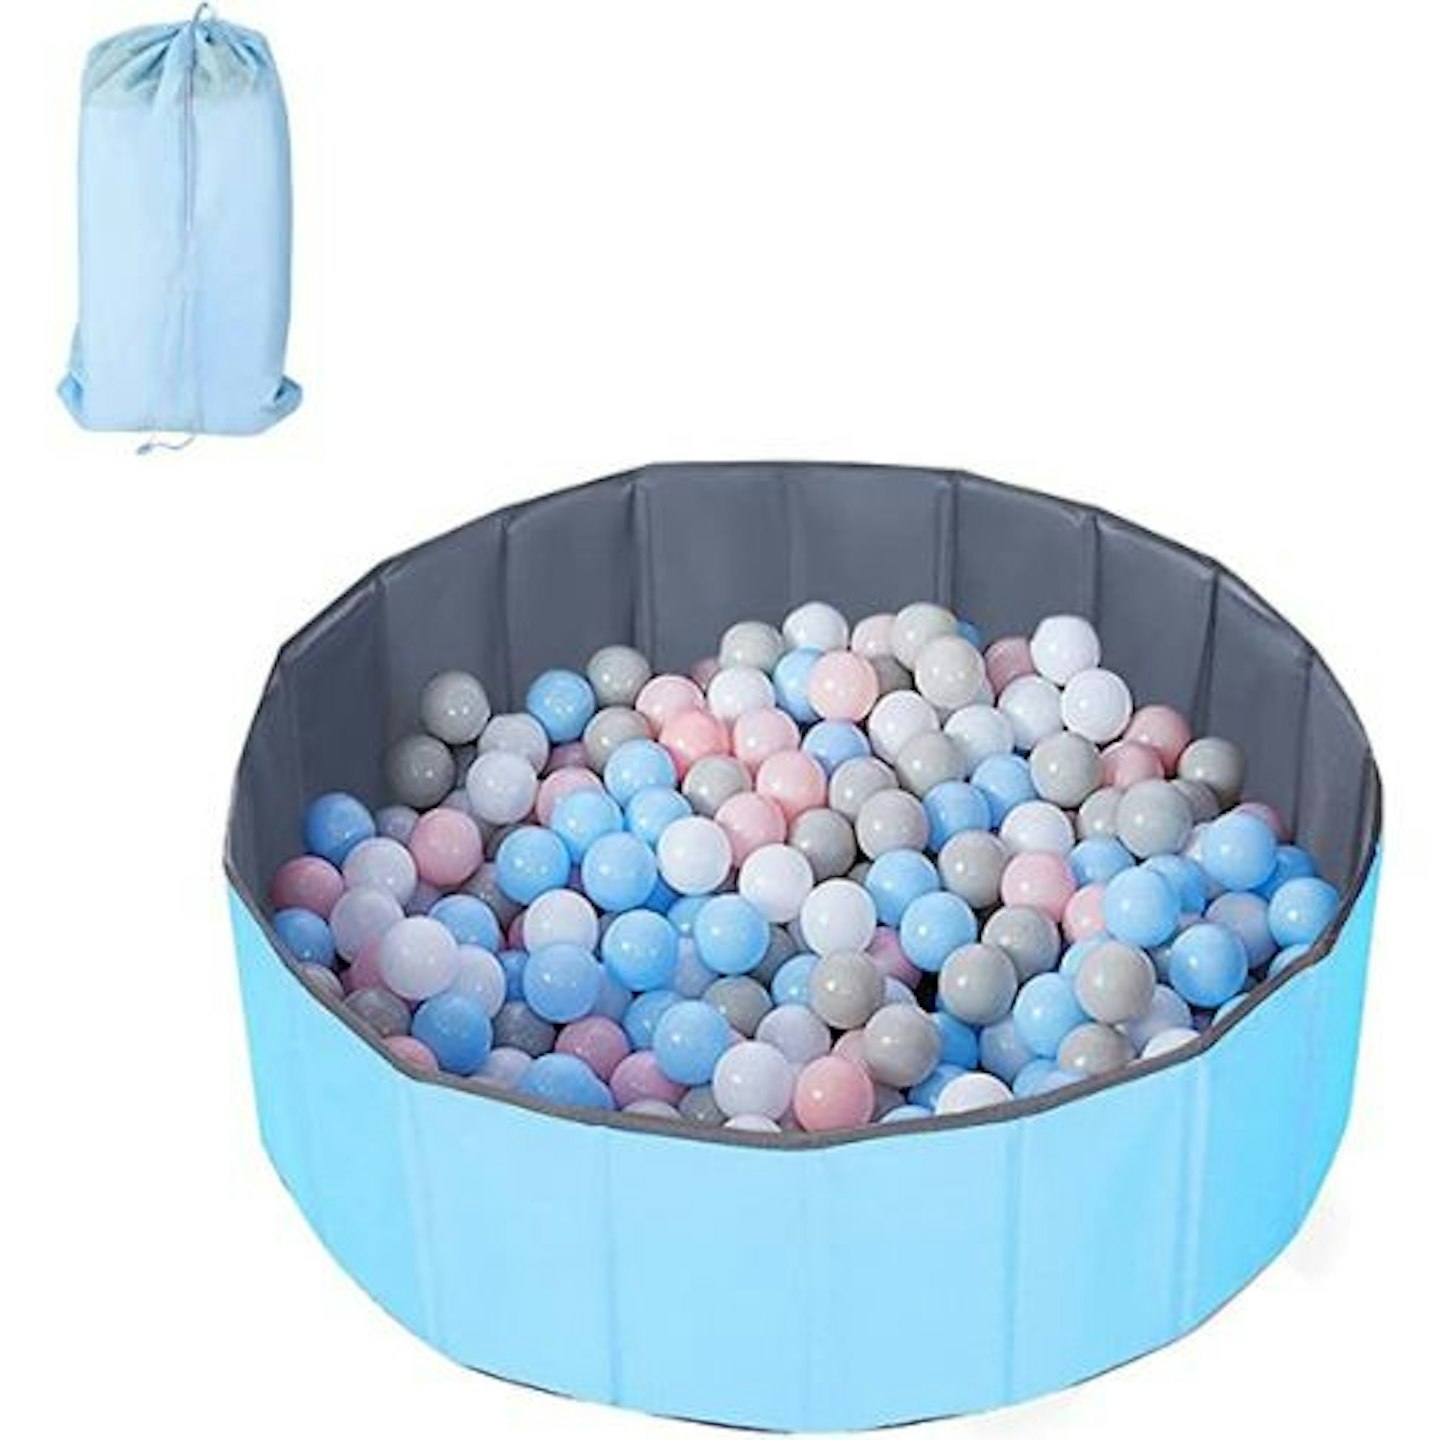 Queiting Kids Ball Pit